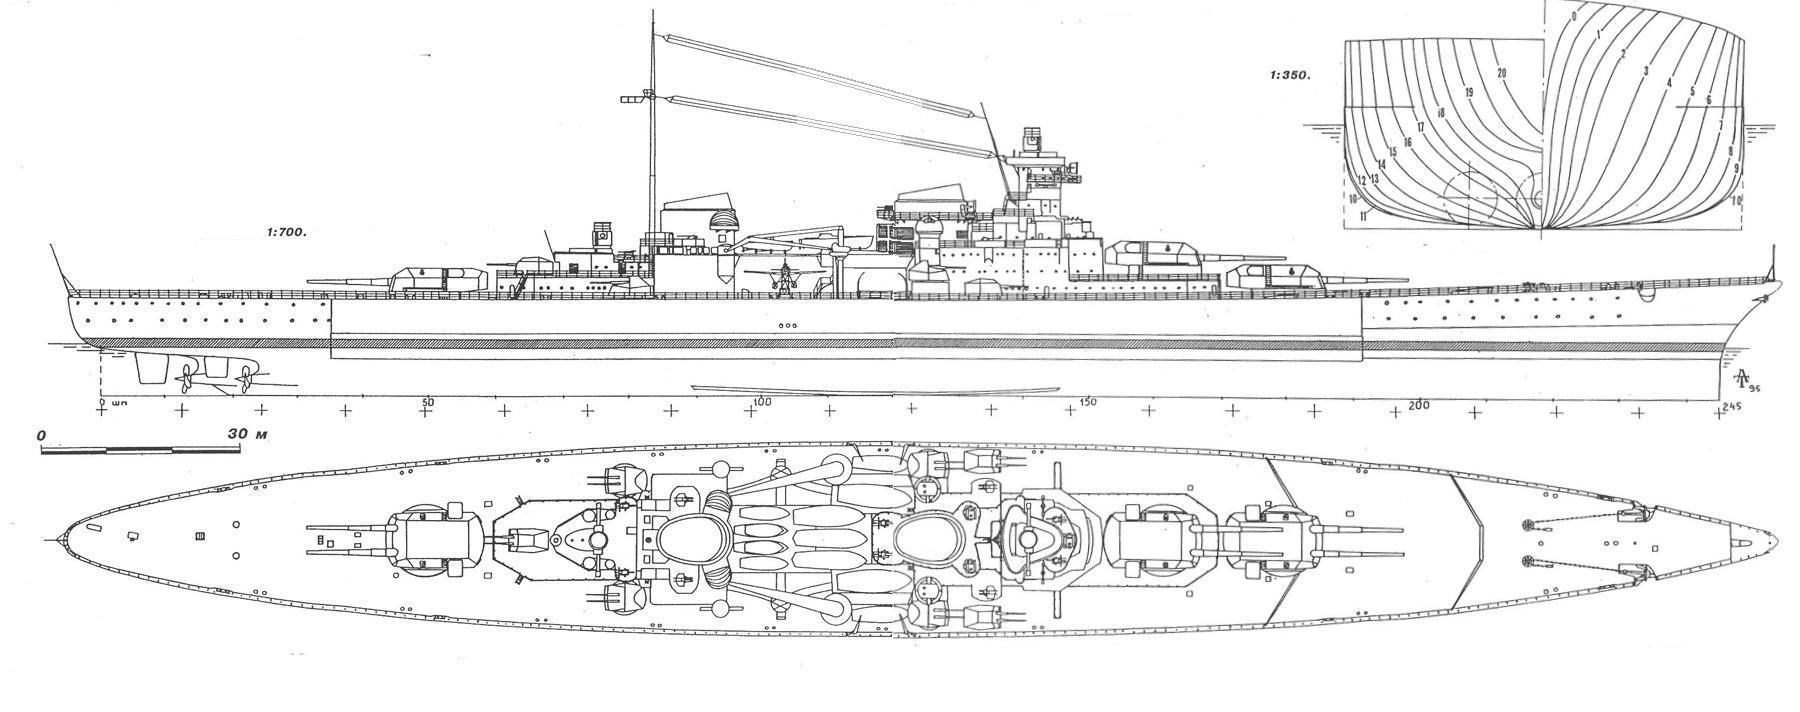 HD version of the design upgraded to the 38 cm caliber turrets